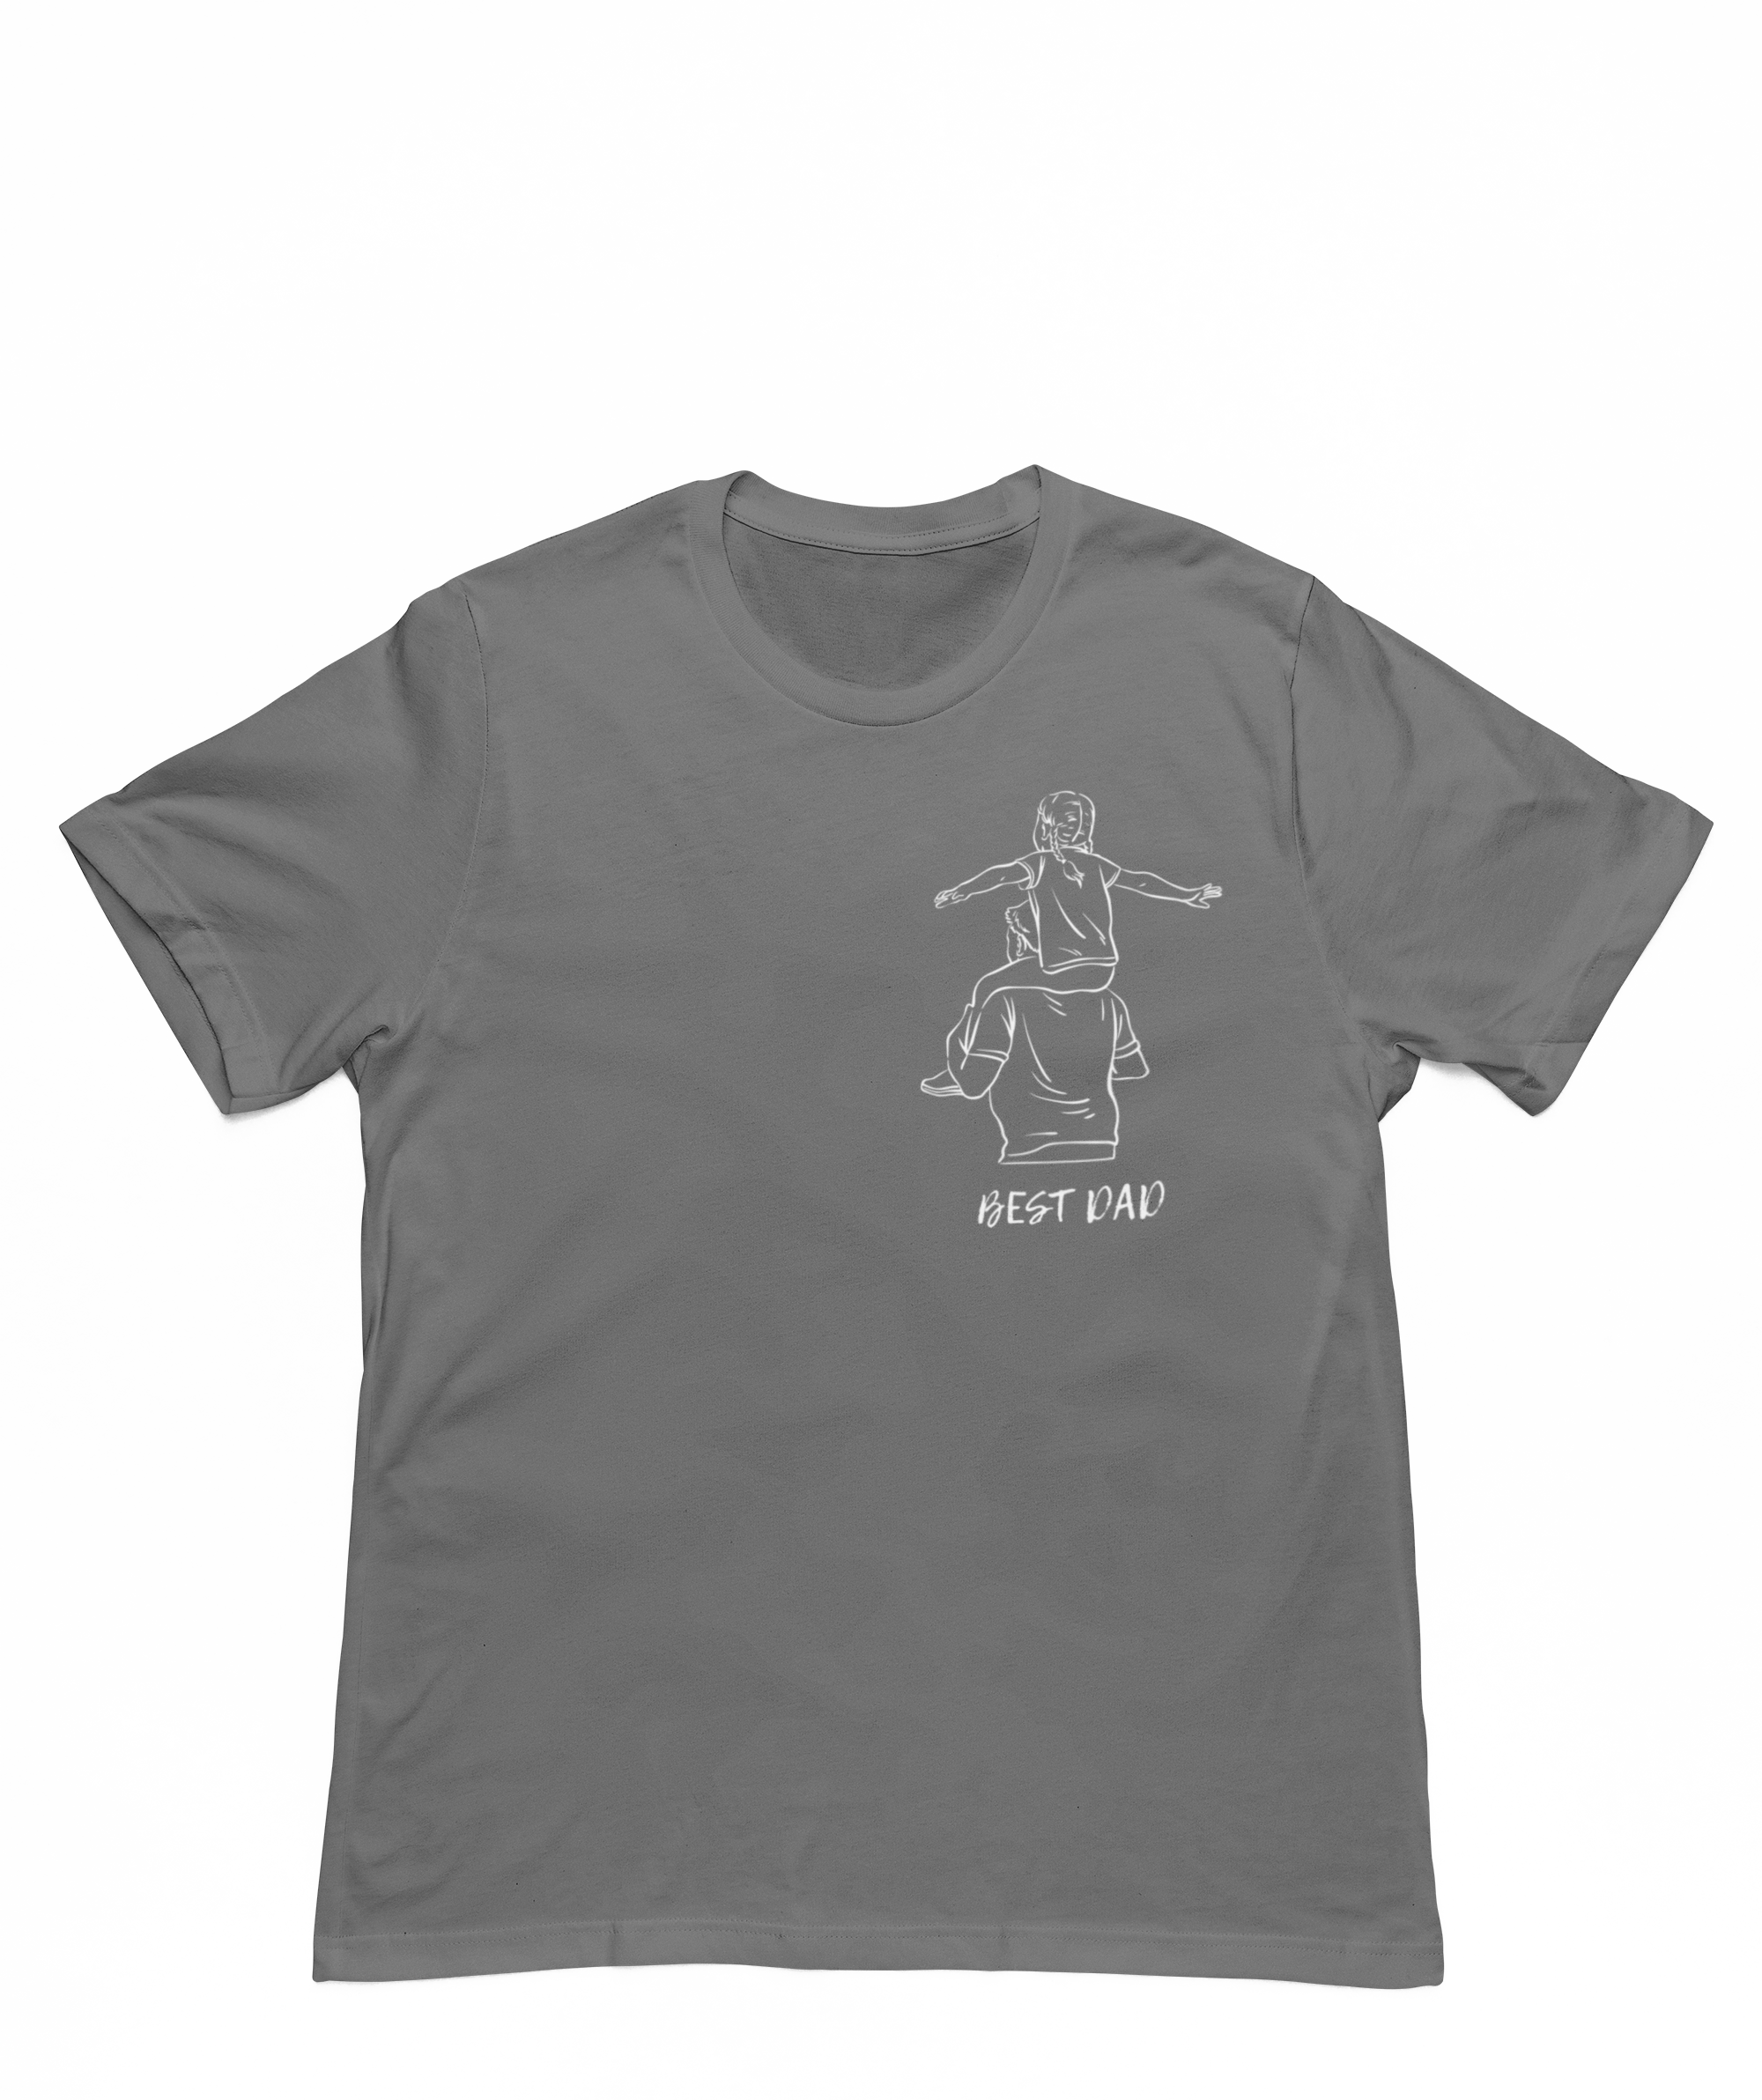 The Best Dad t-shirt - Father's Day gift